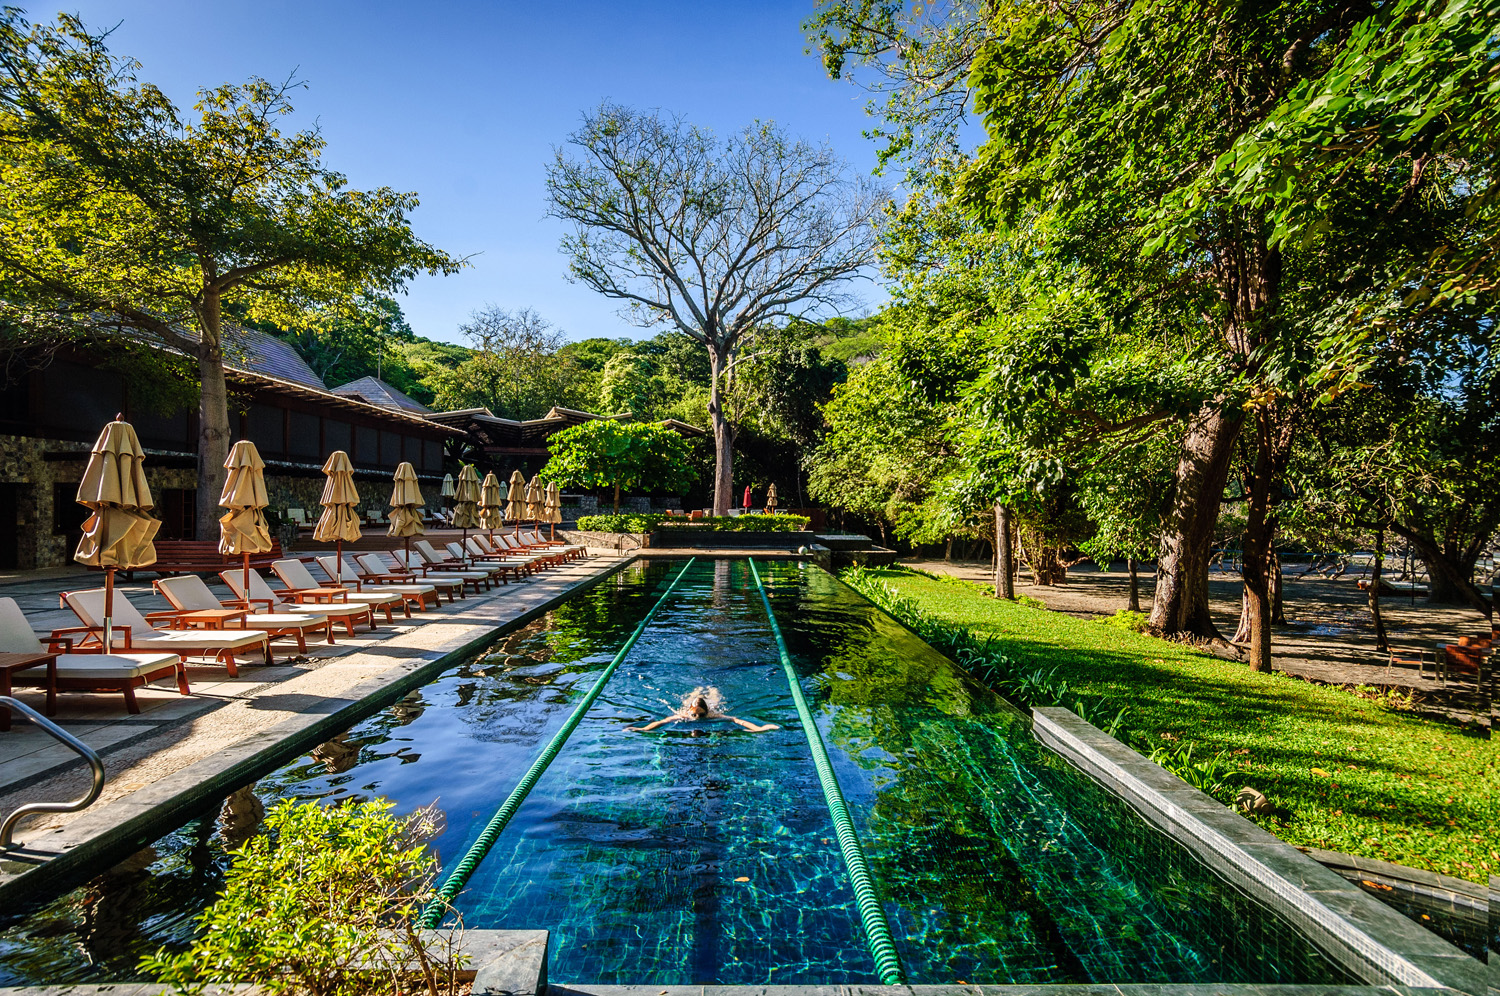 El Alma Soul Retreat in Costa Rica exemplifies hotels’ trend of going natural with their design.